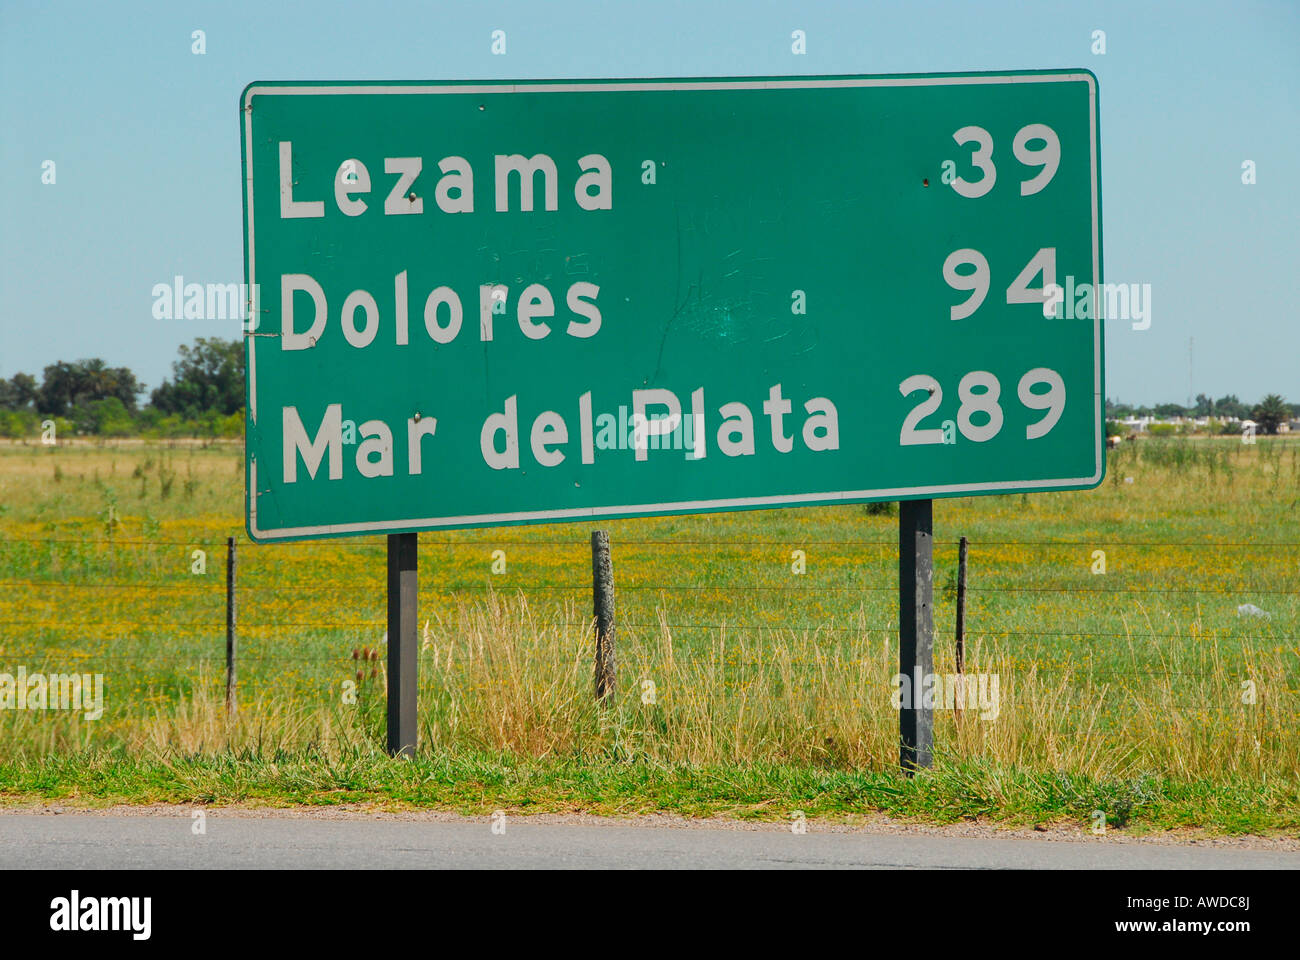 Street sign near Dolores, Buenos Aires province, Argentina Stock Photo